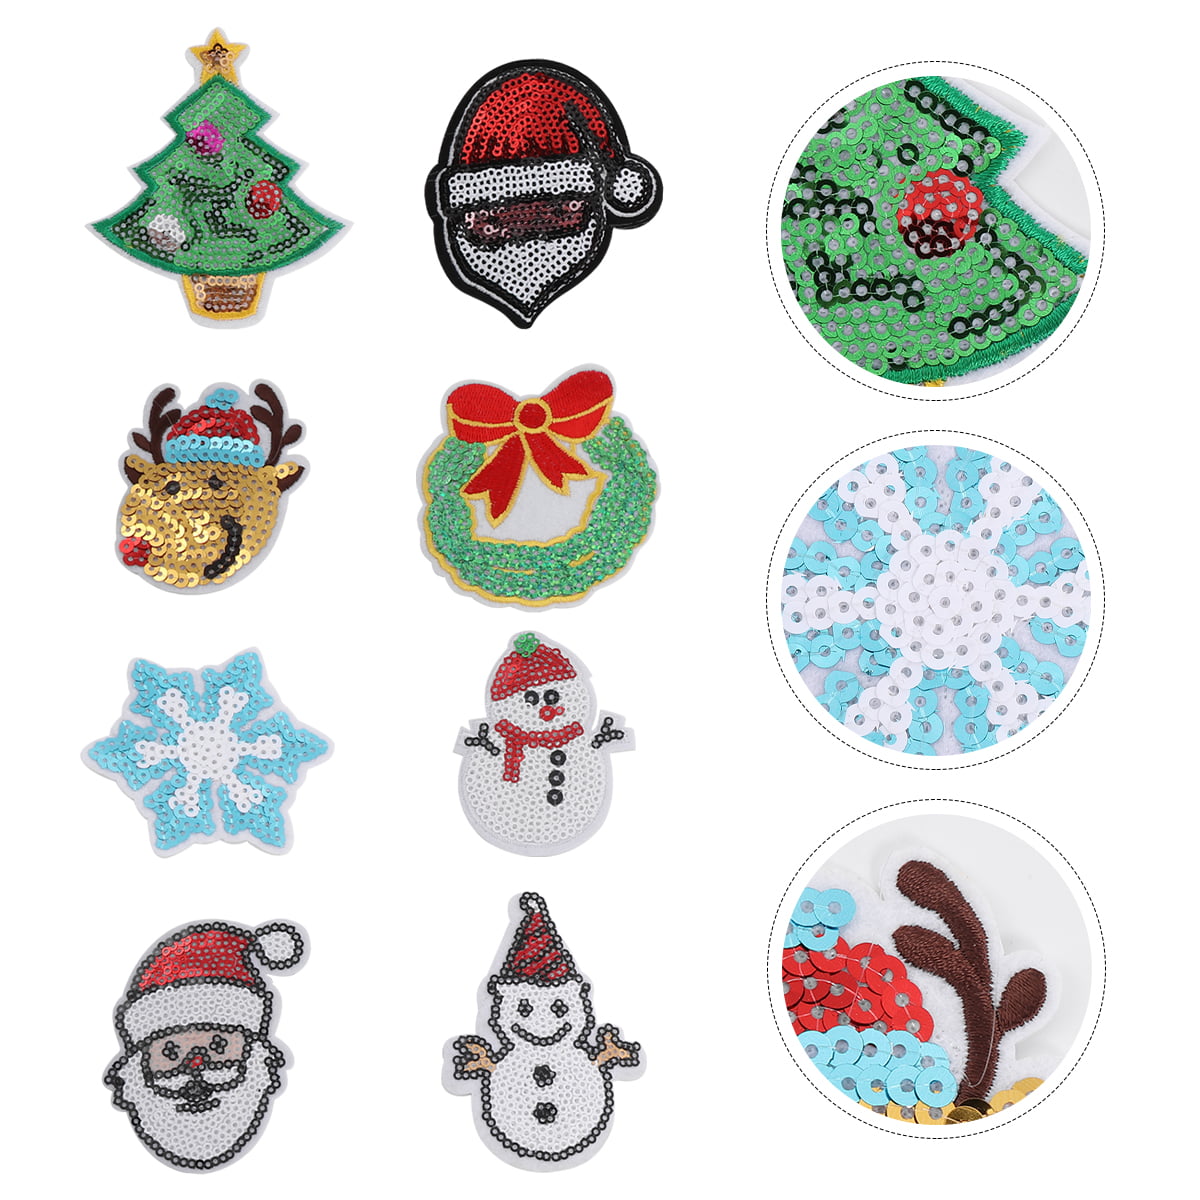  Amosfun 18 Pcs Embroidered Sewing Patches Christmas